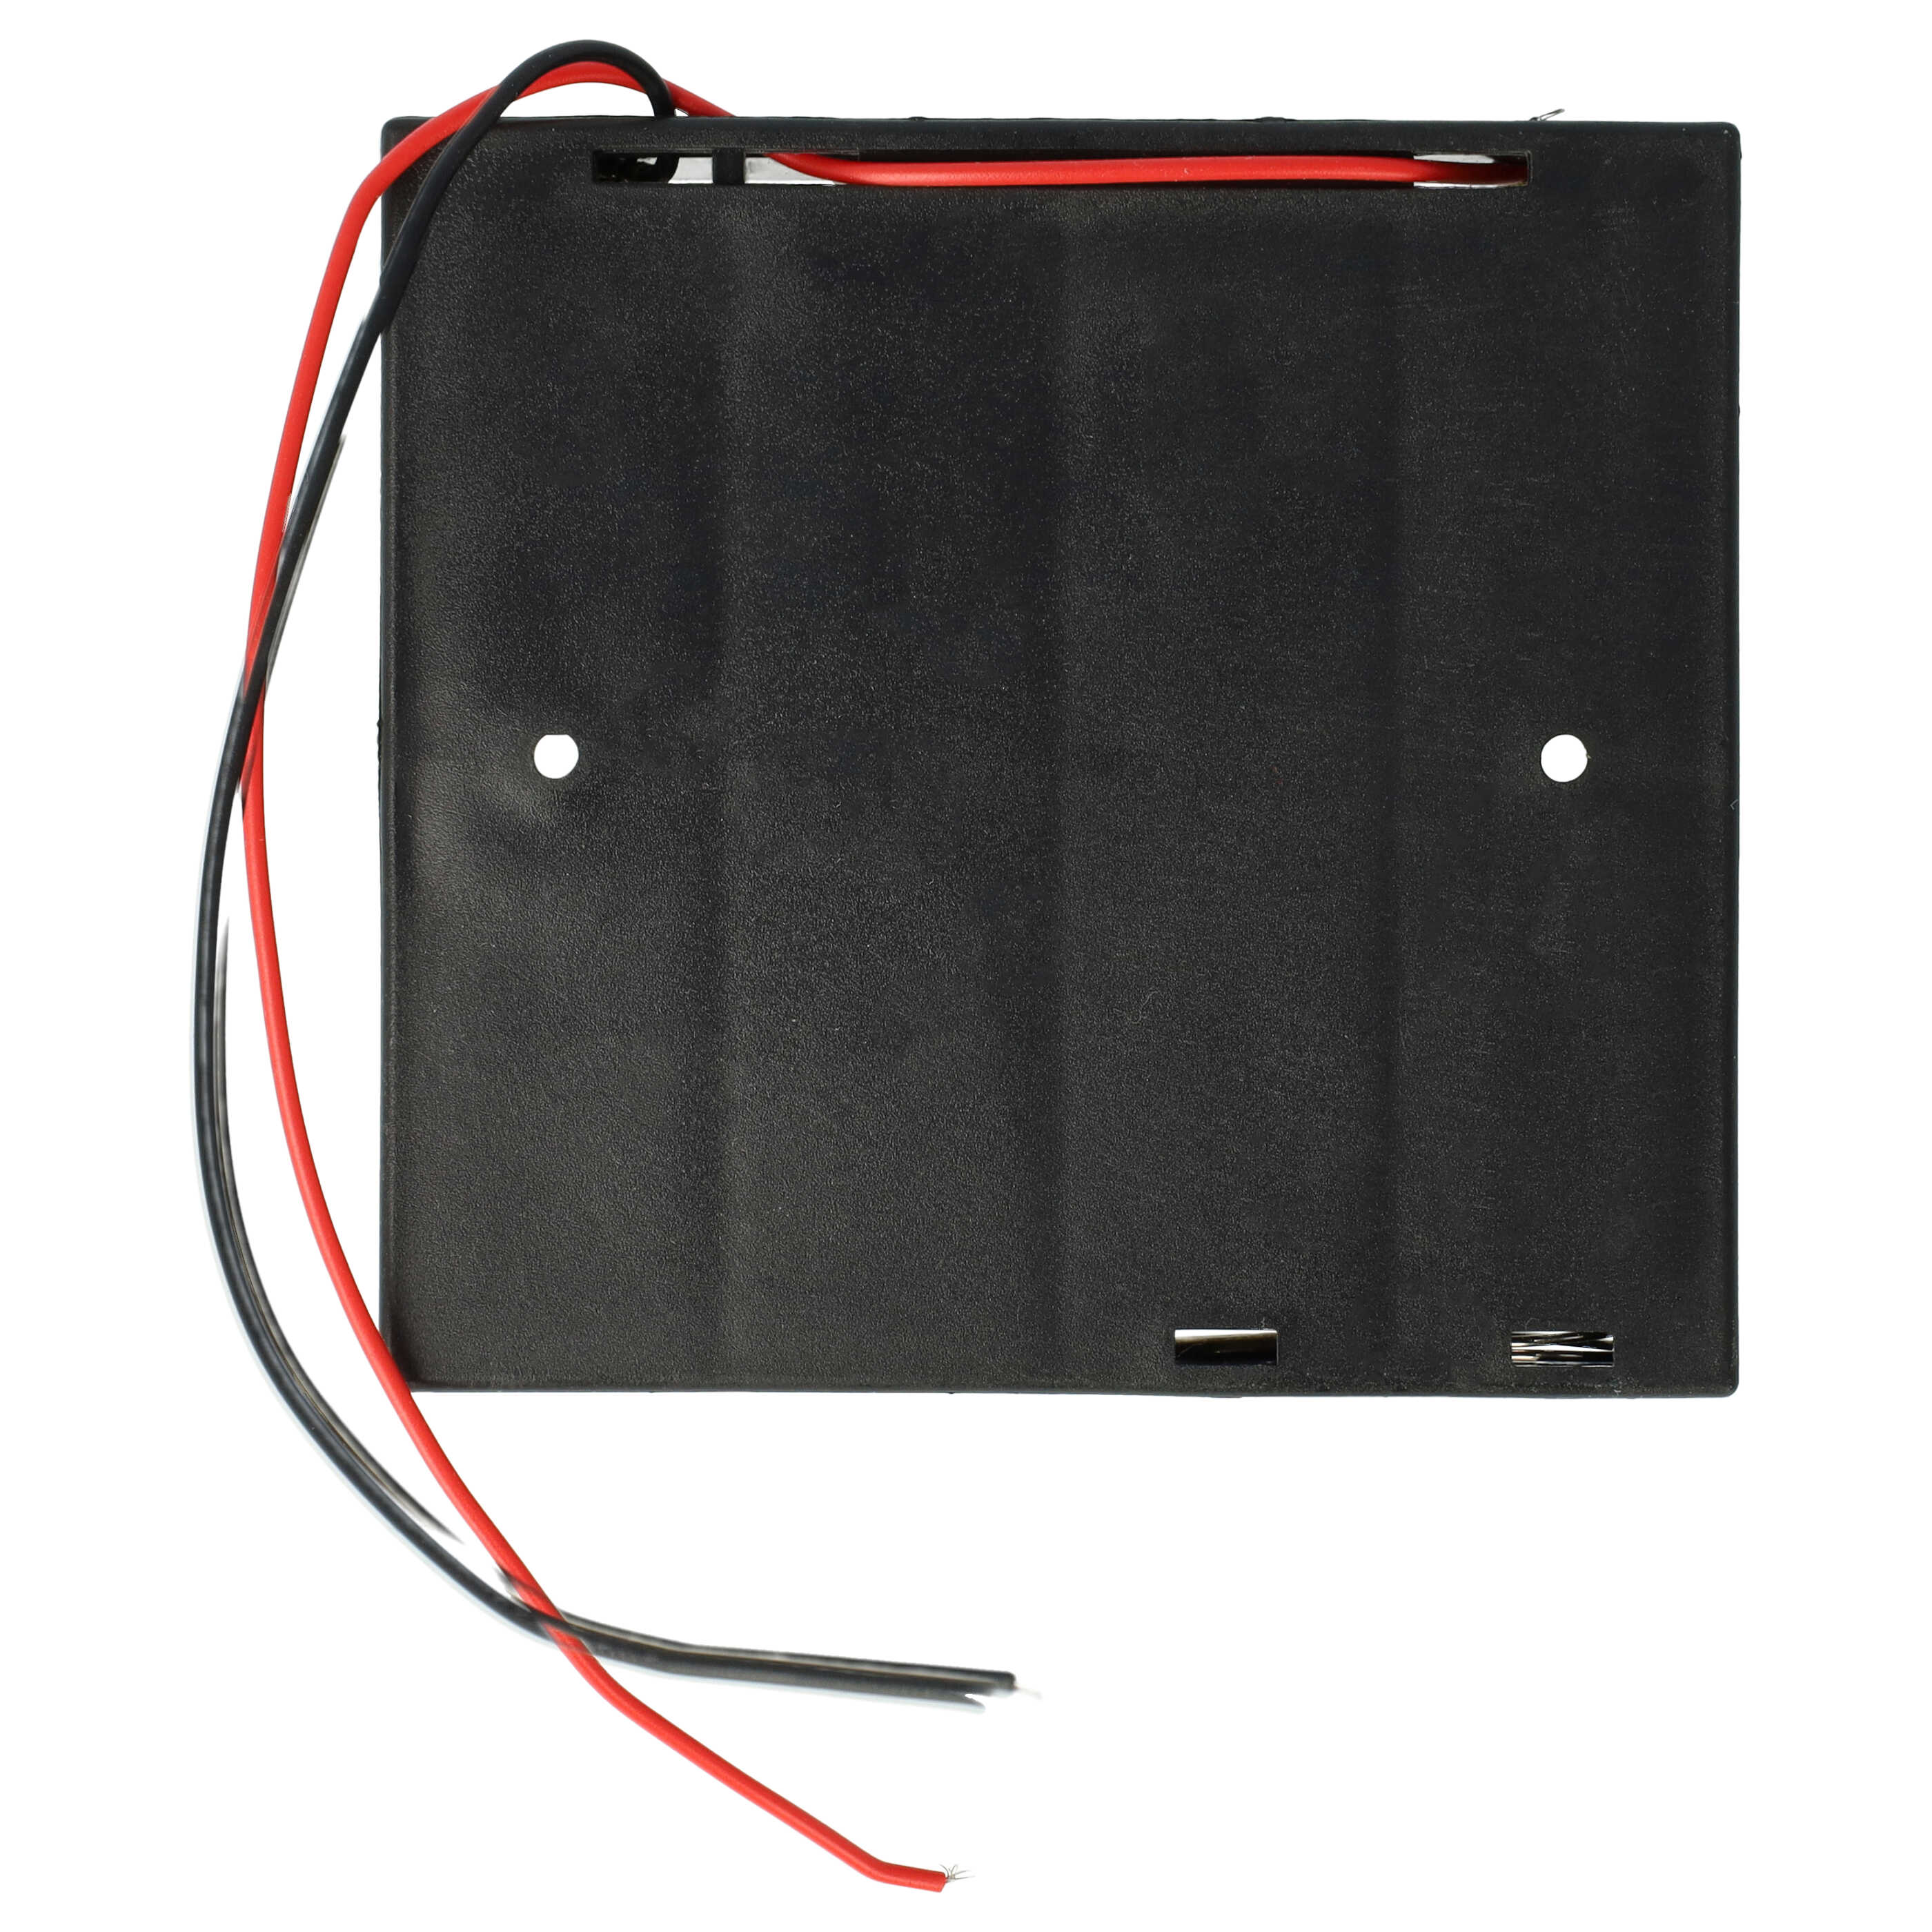 Battery Holder Case 18650 for 4 Cells - Holder with Wire, Coil Spring